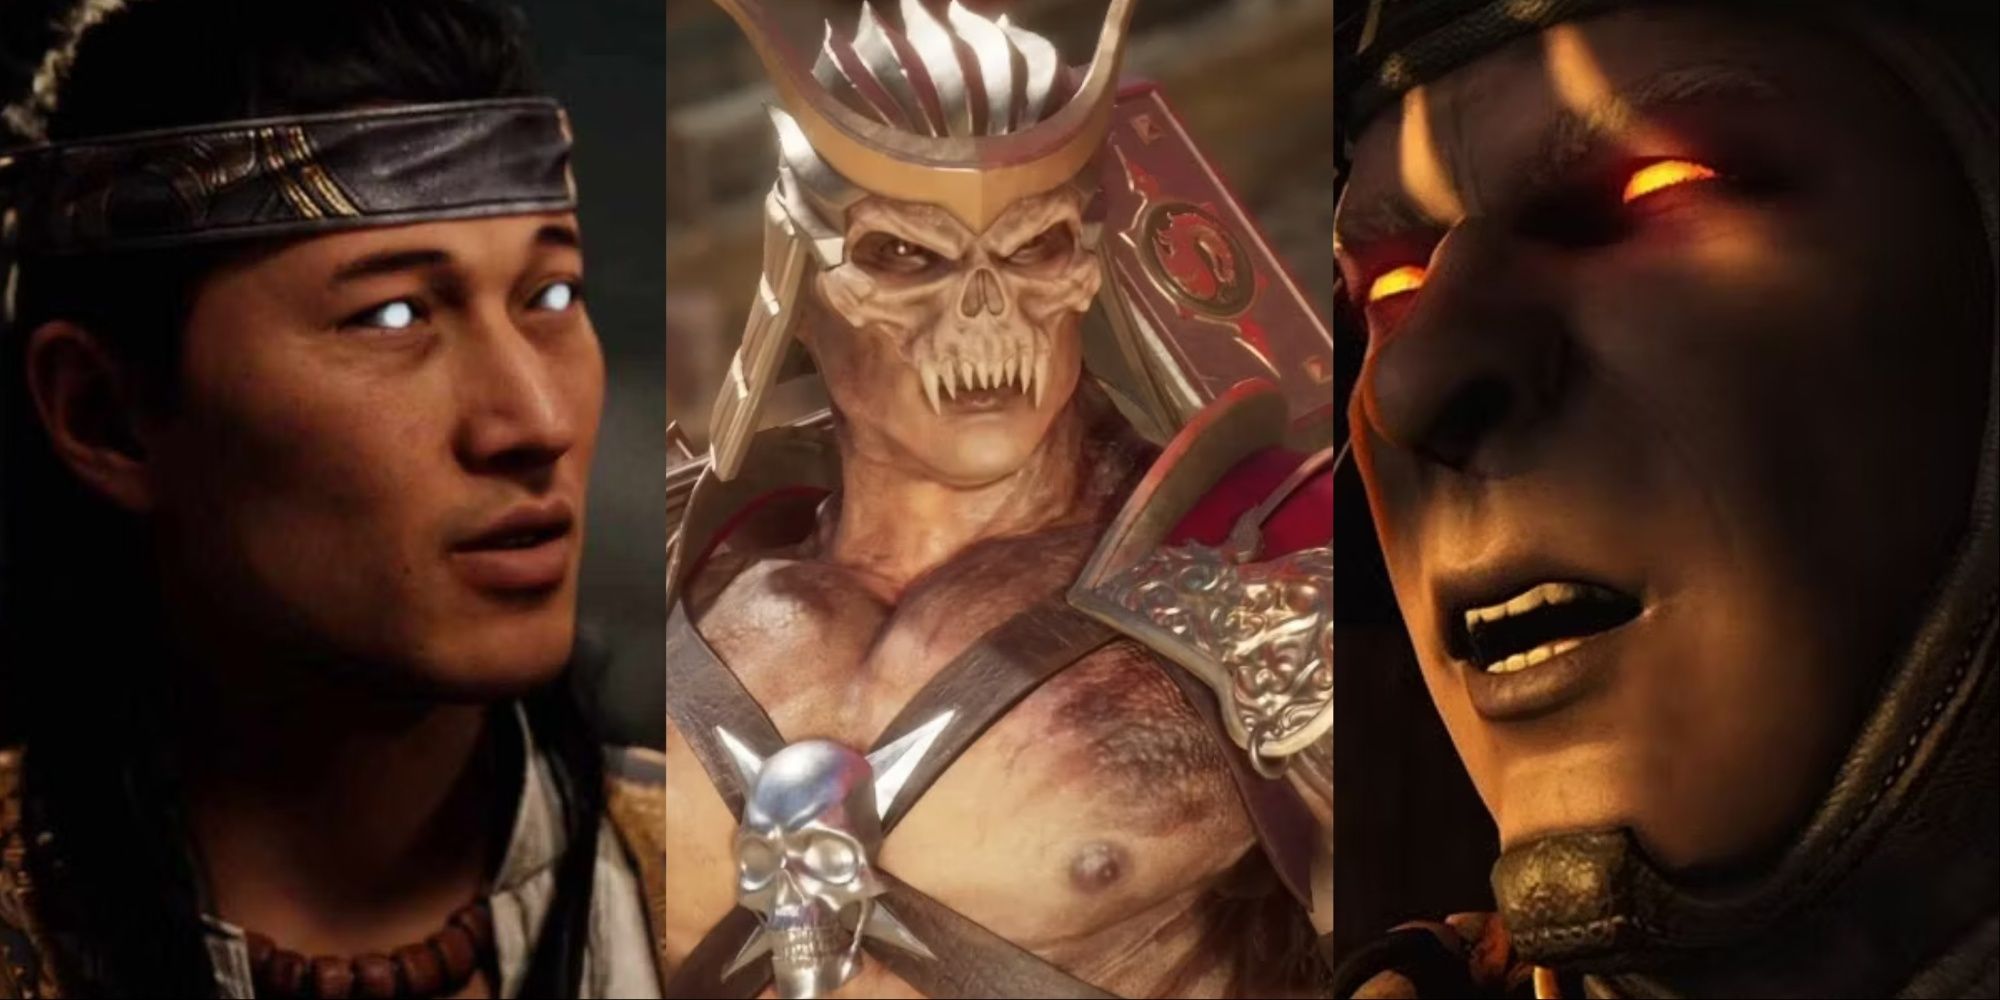 A collage showing the faces of Liu Kang, Shao Kahn, and Raiden.